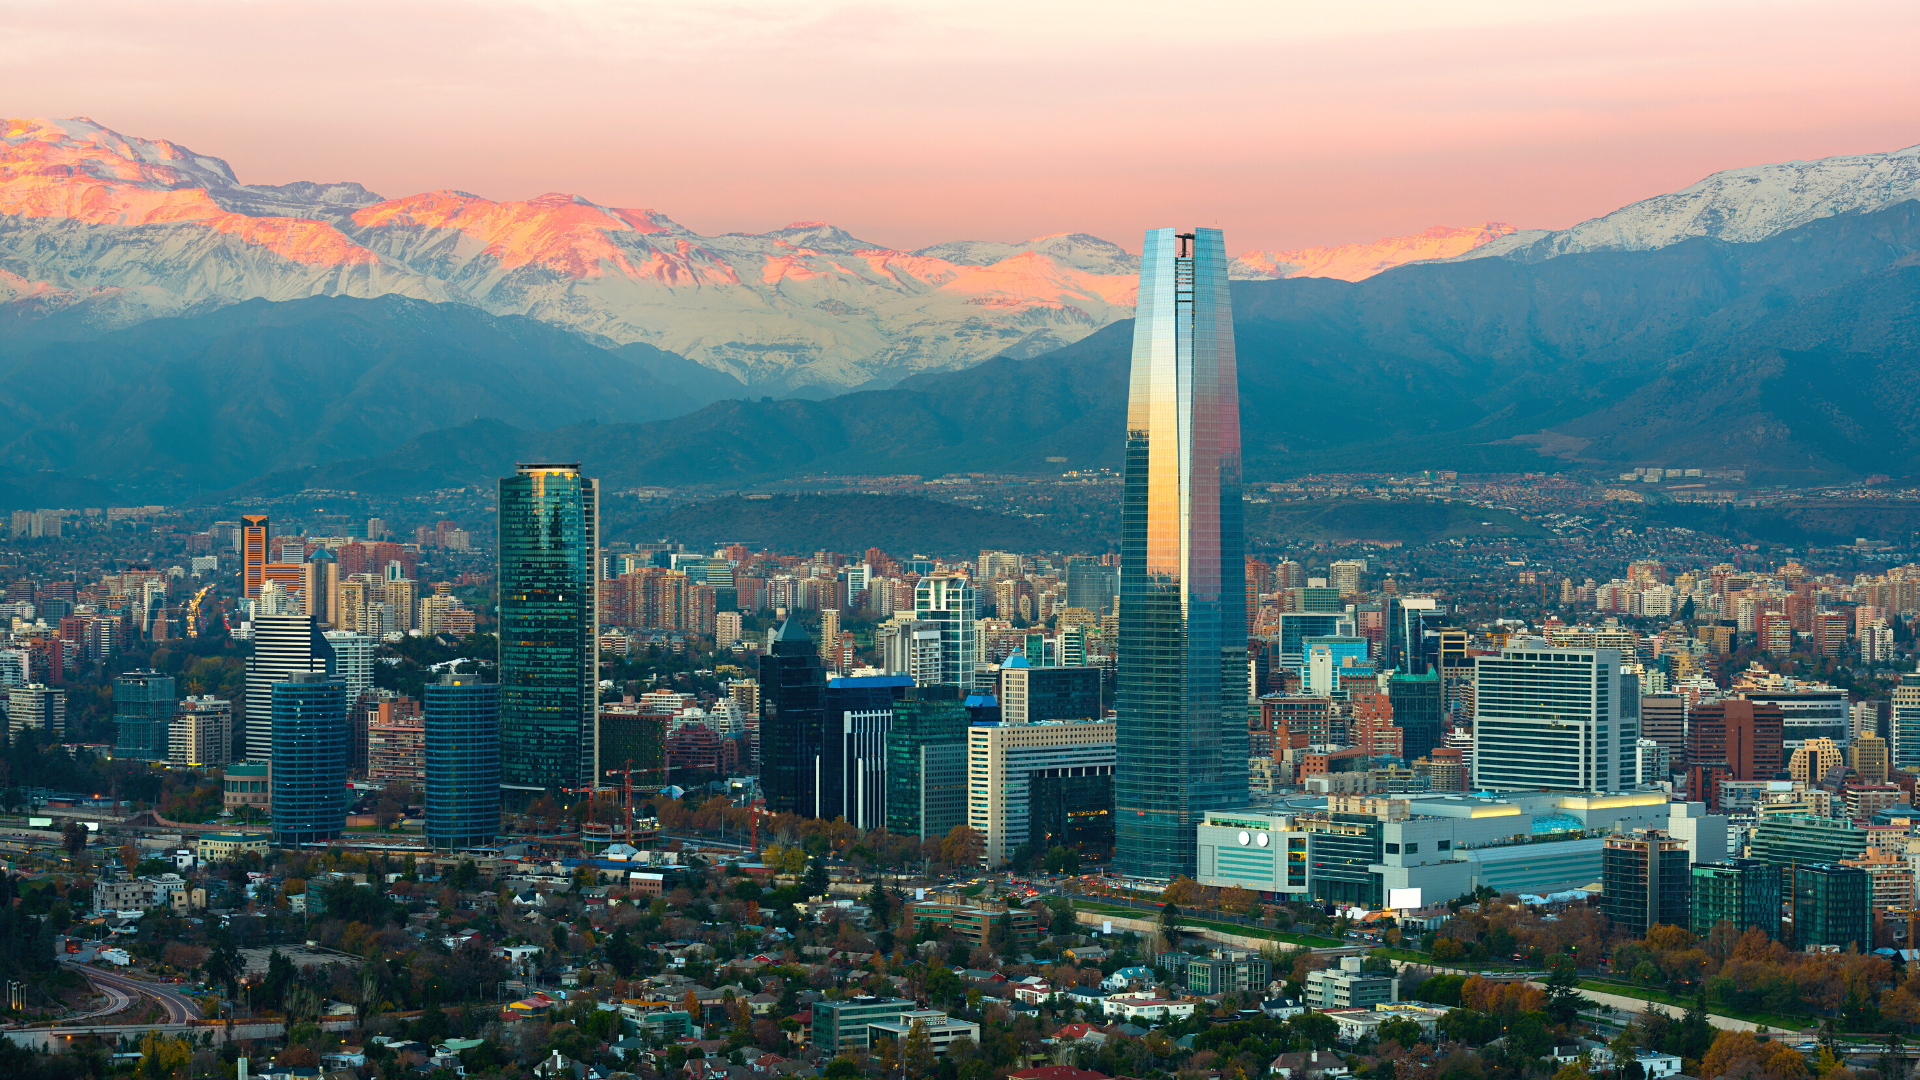 Overview of a city in Chile